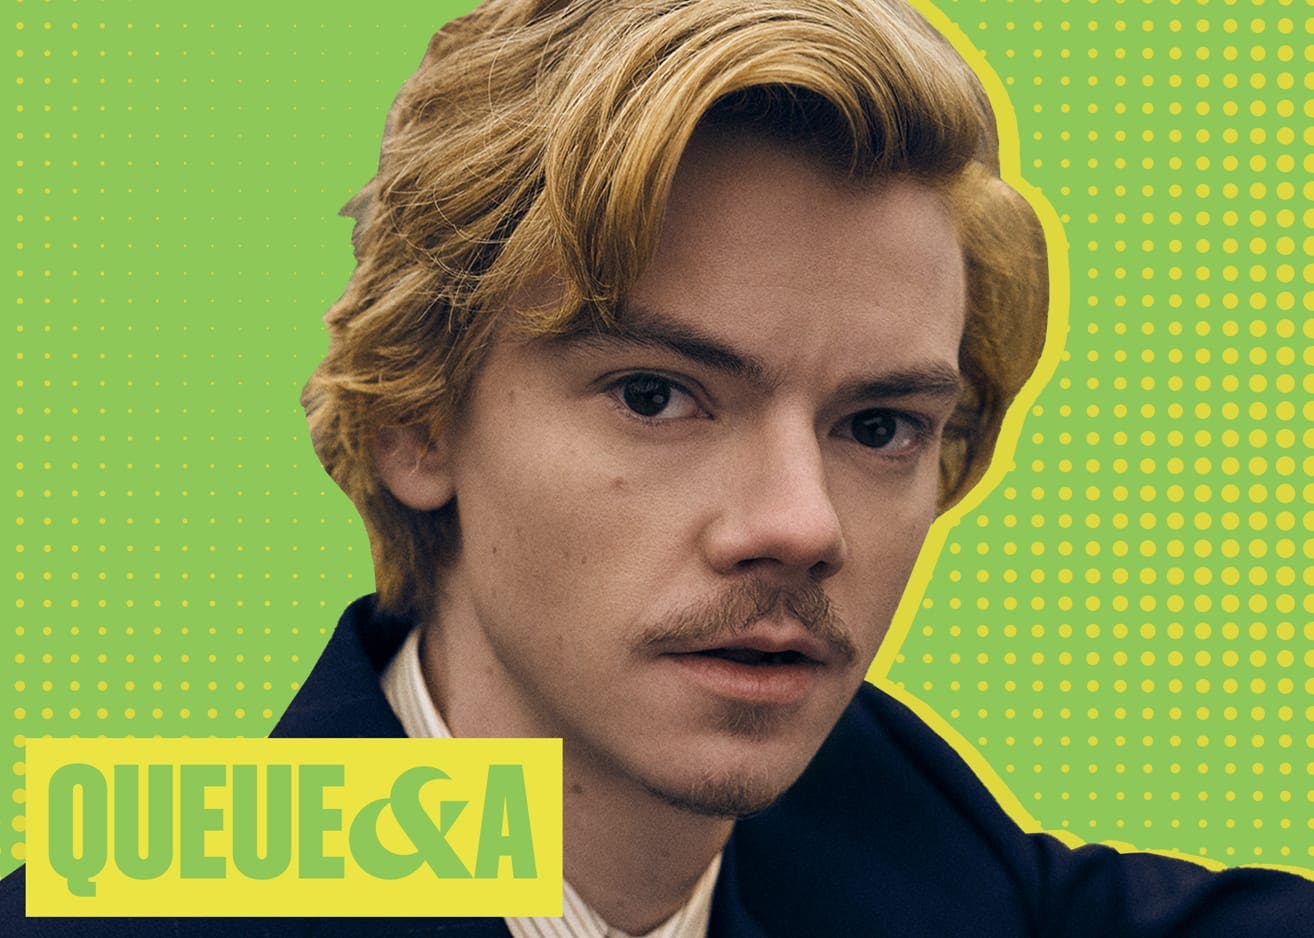 A colorful portrait of Thomas Brodie-Sangster against a lime green and yellow background. He wears a black jacket, white shirt, and sports an incredible mustache. Beneath his face reads Queue & A in lime green in a yellow box.